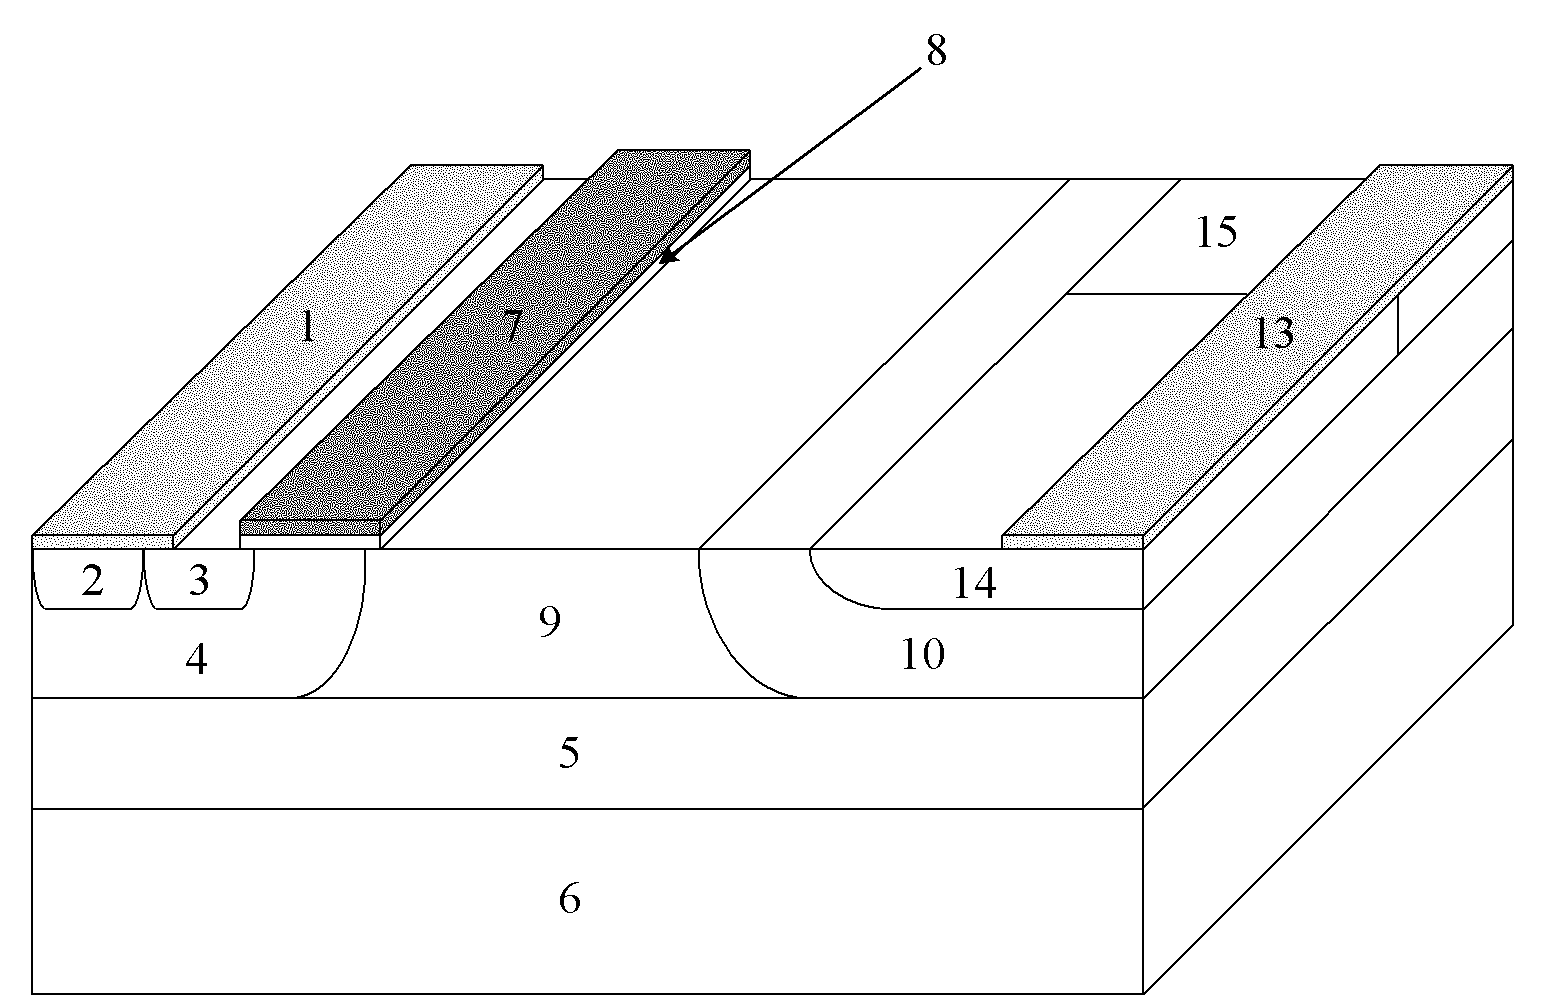 SOI-LIGBT (silicon on insulator-lateral insulated gate bipolar transistor) device with split anode structure